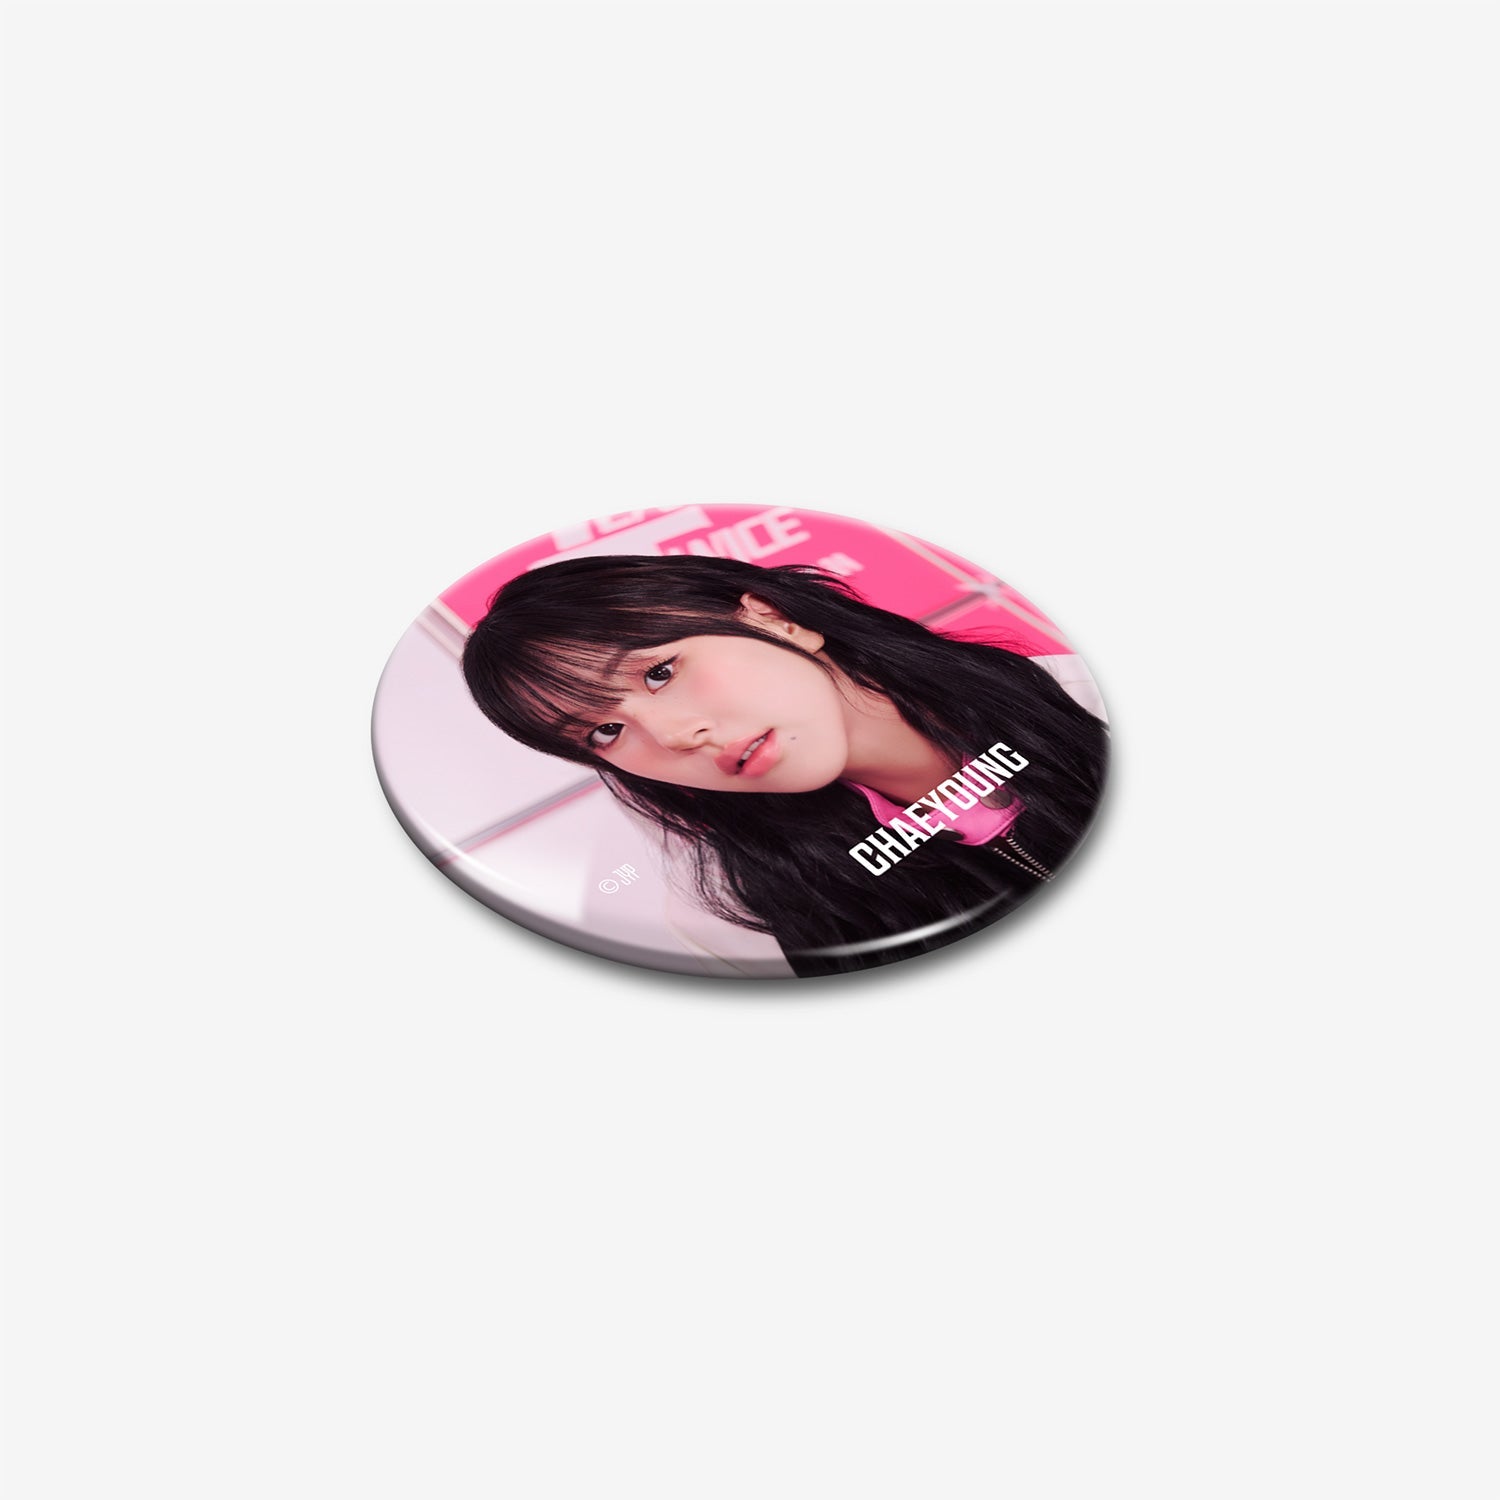 PHOTO BADGE - CHAEYOUNG【DOME】/ TWICE『READY TO BE』